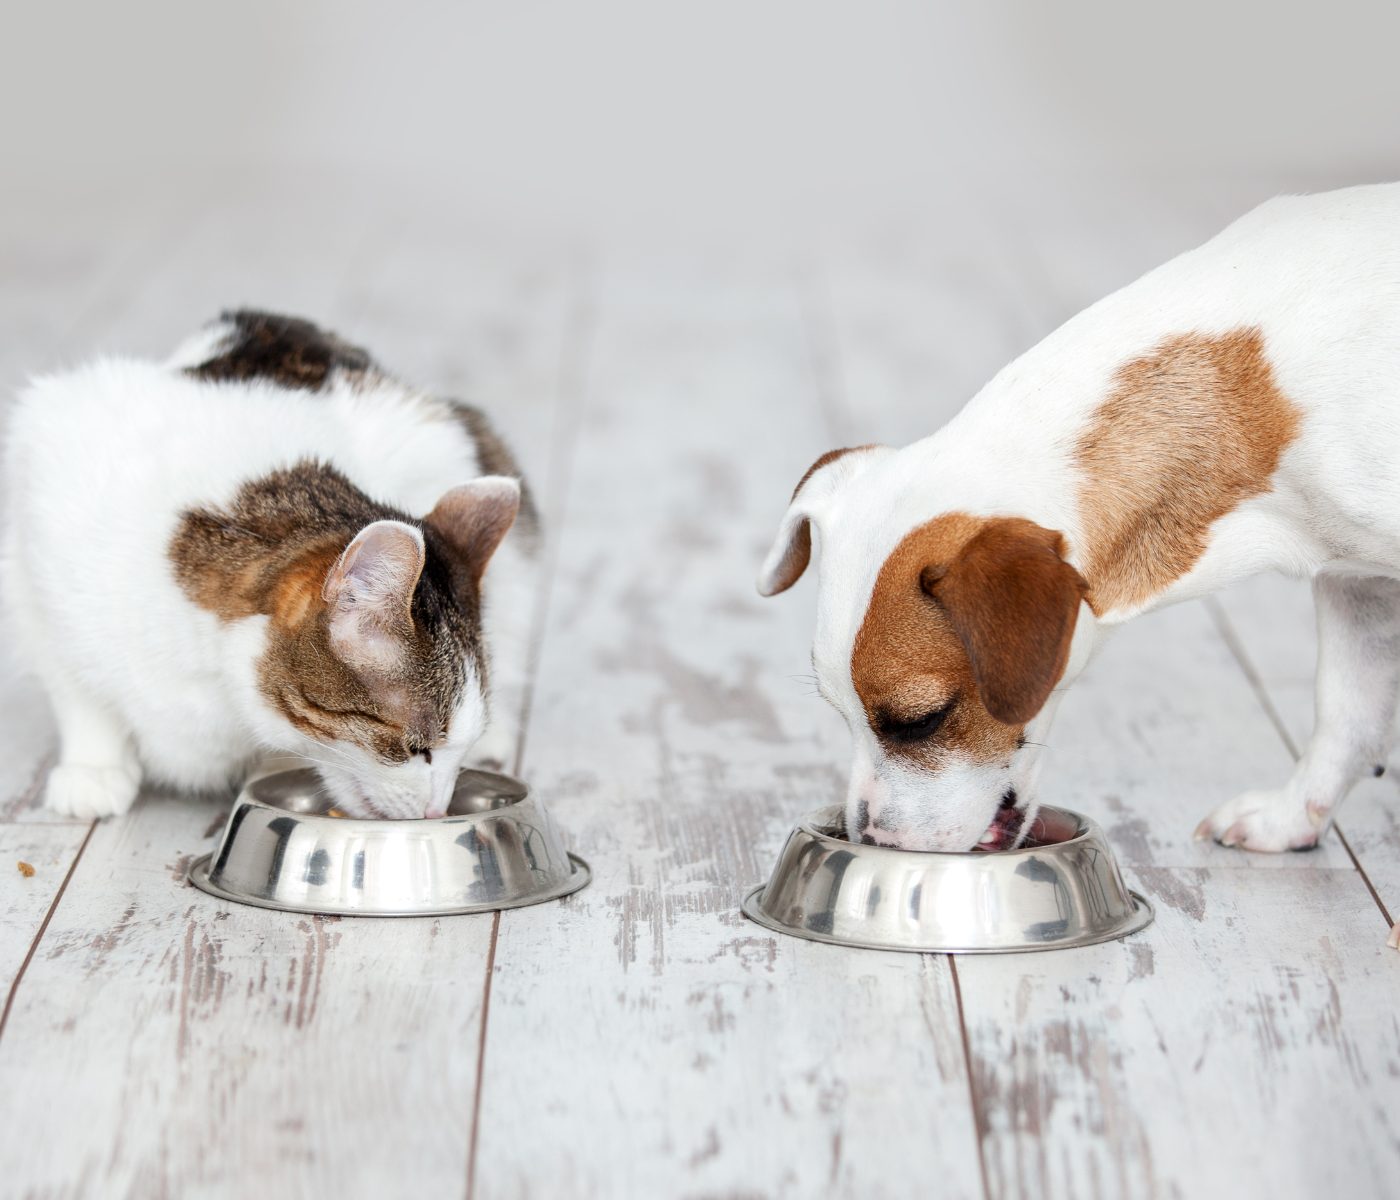 Nutraceuticals in small animal diets